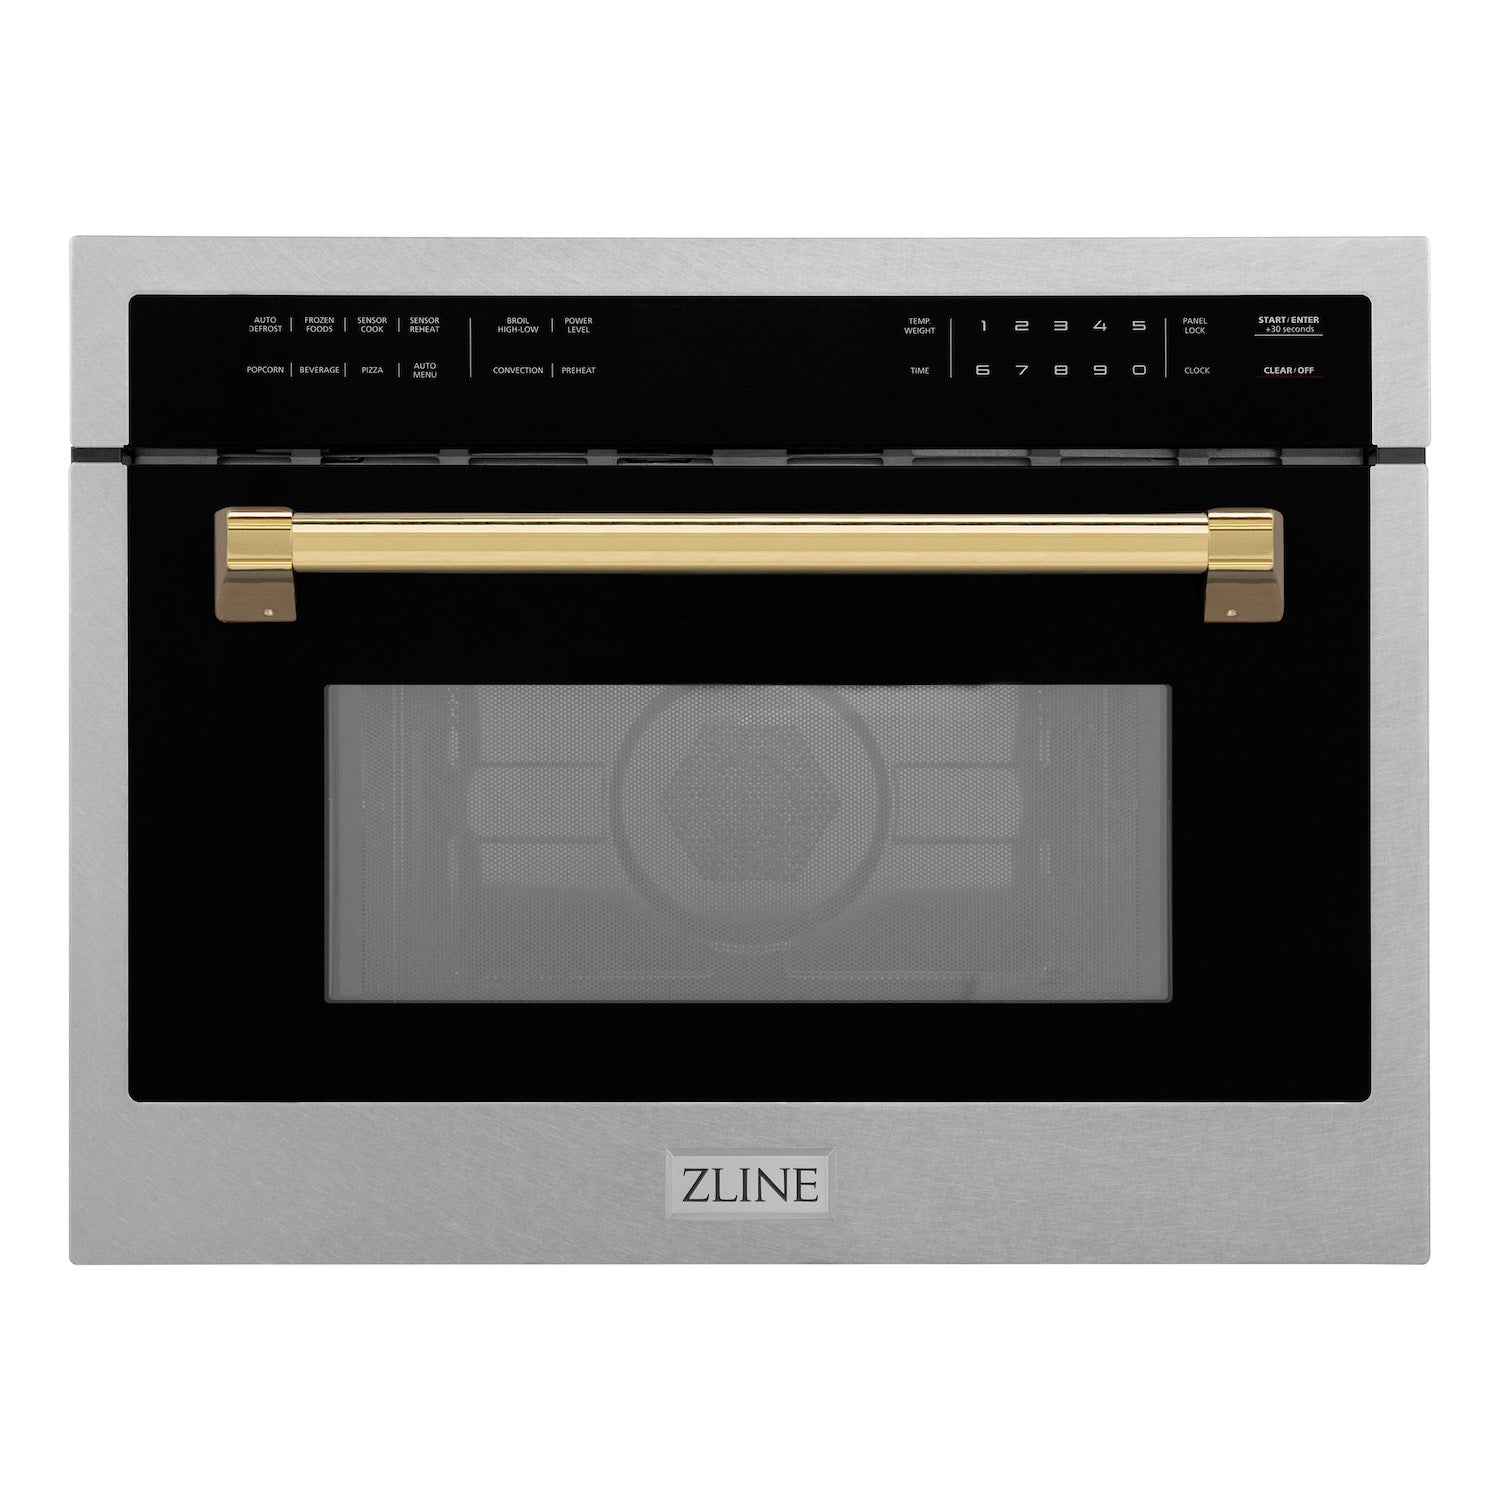 ZLINE Autograph Edition 24 in. 1.6 cu ft. Built-in Convection Microwave Oven in DuraSnow Stainless Steel with Polished Gold Accents front with door closed.